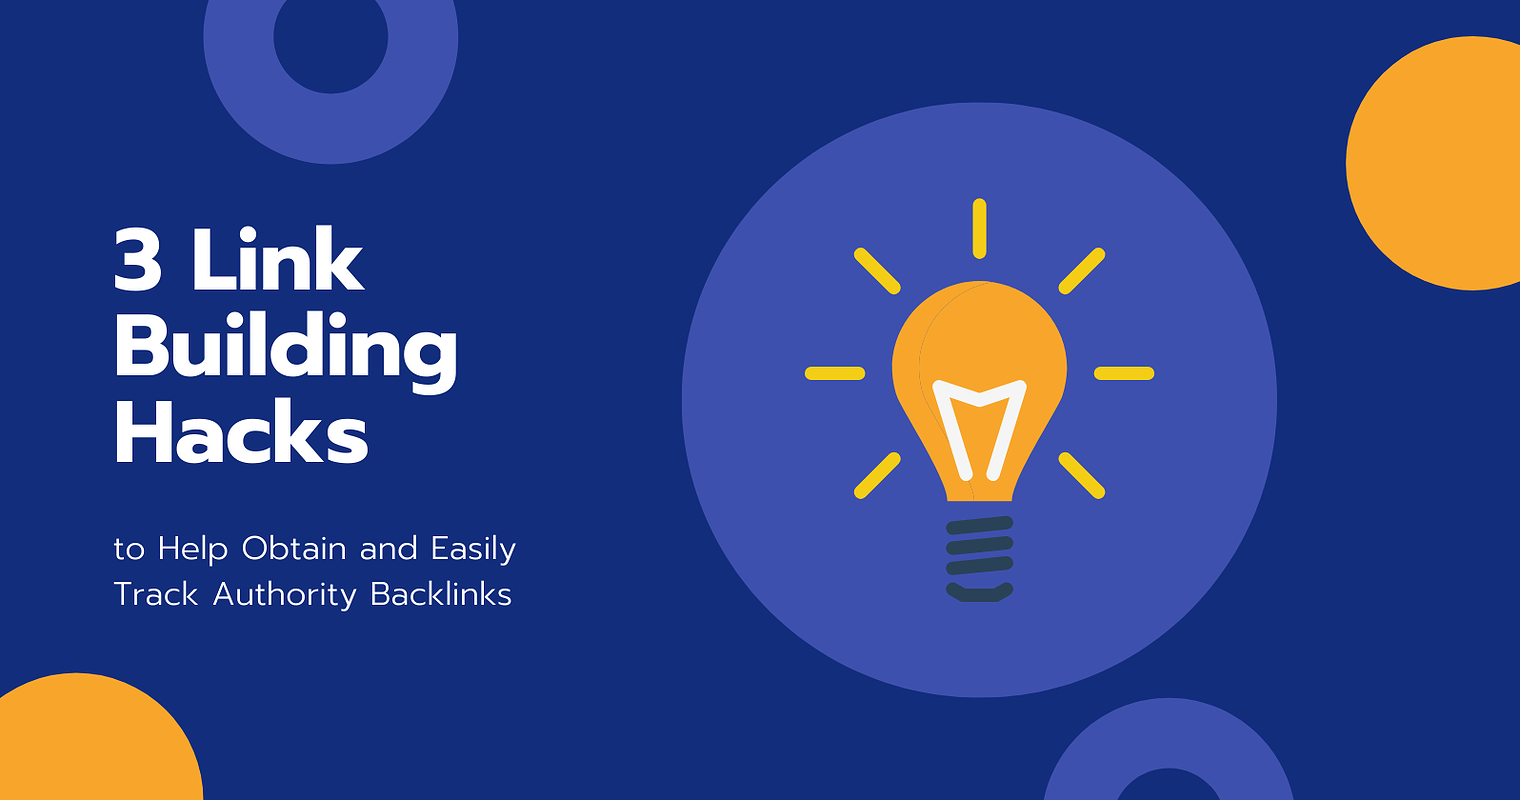 3 Link Building Tips to Help Obtain & Easily Track Authority Backlinks